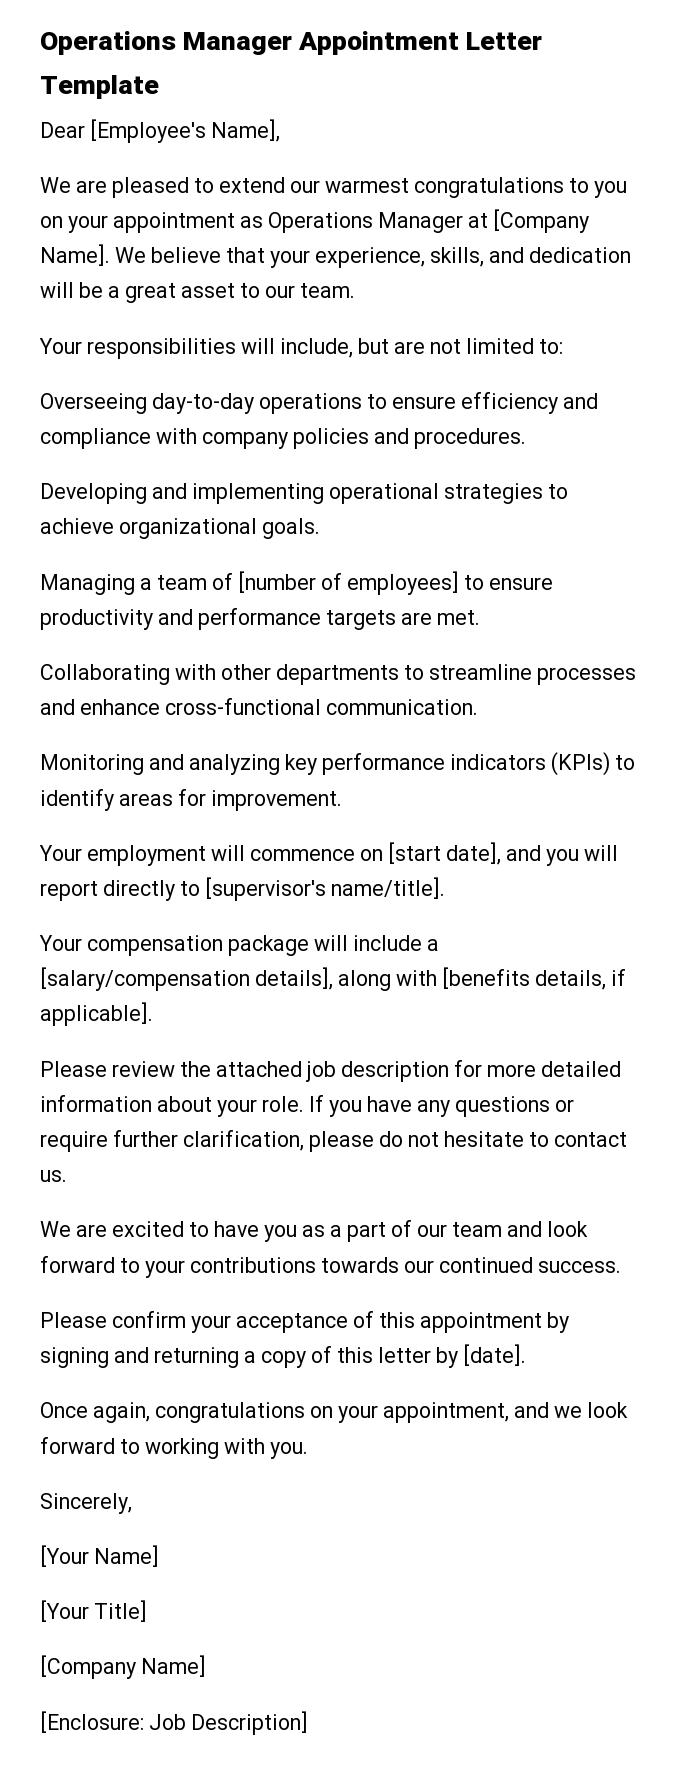 Operations Manager Appointment Letter Template